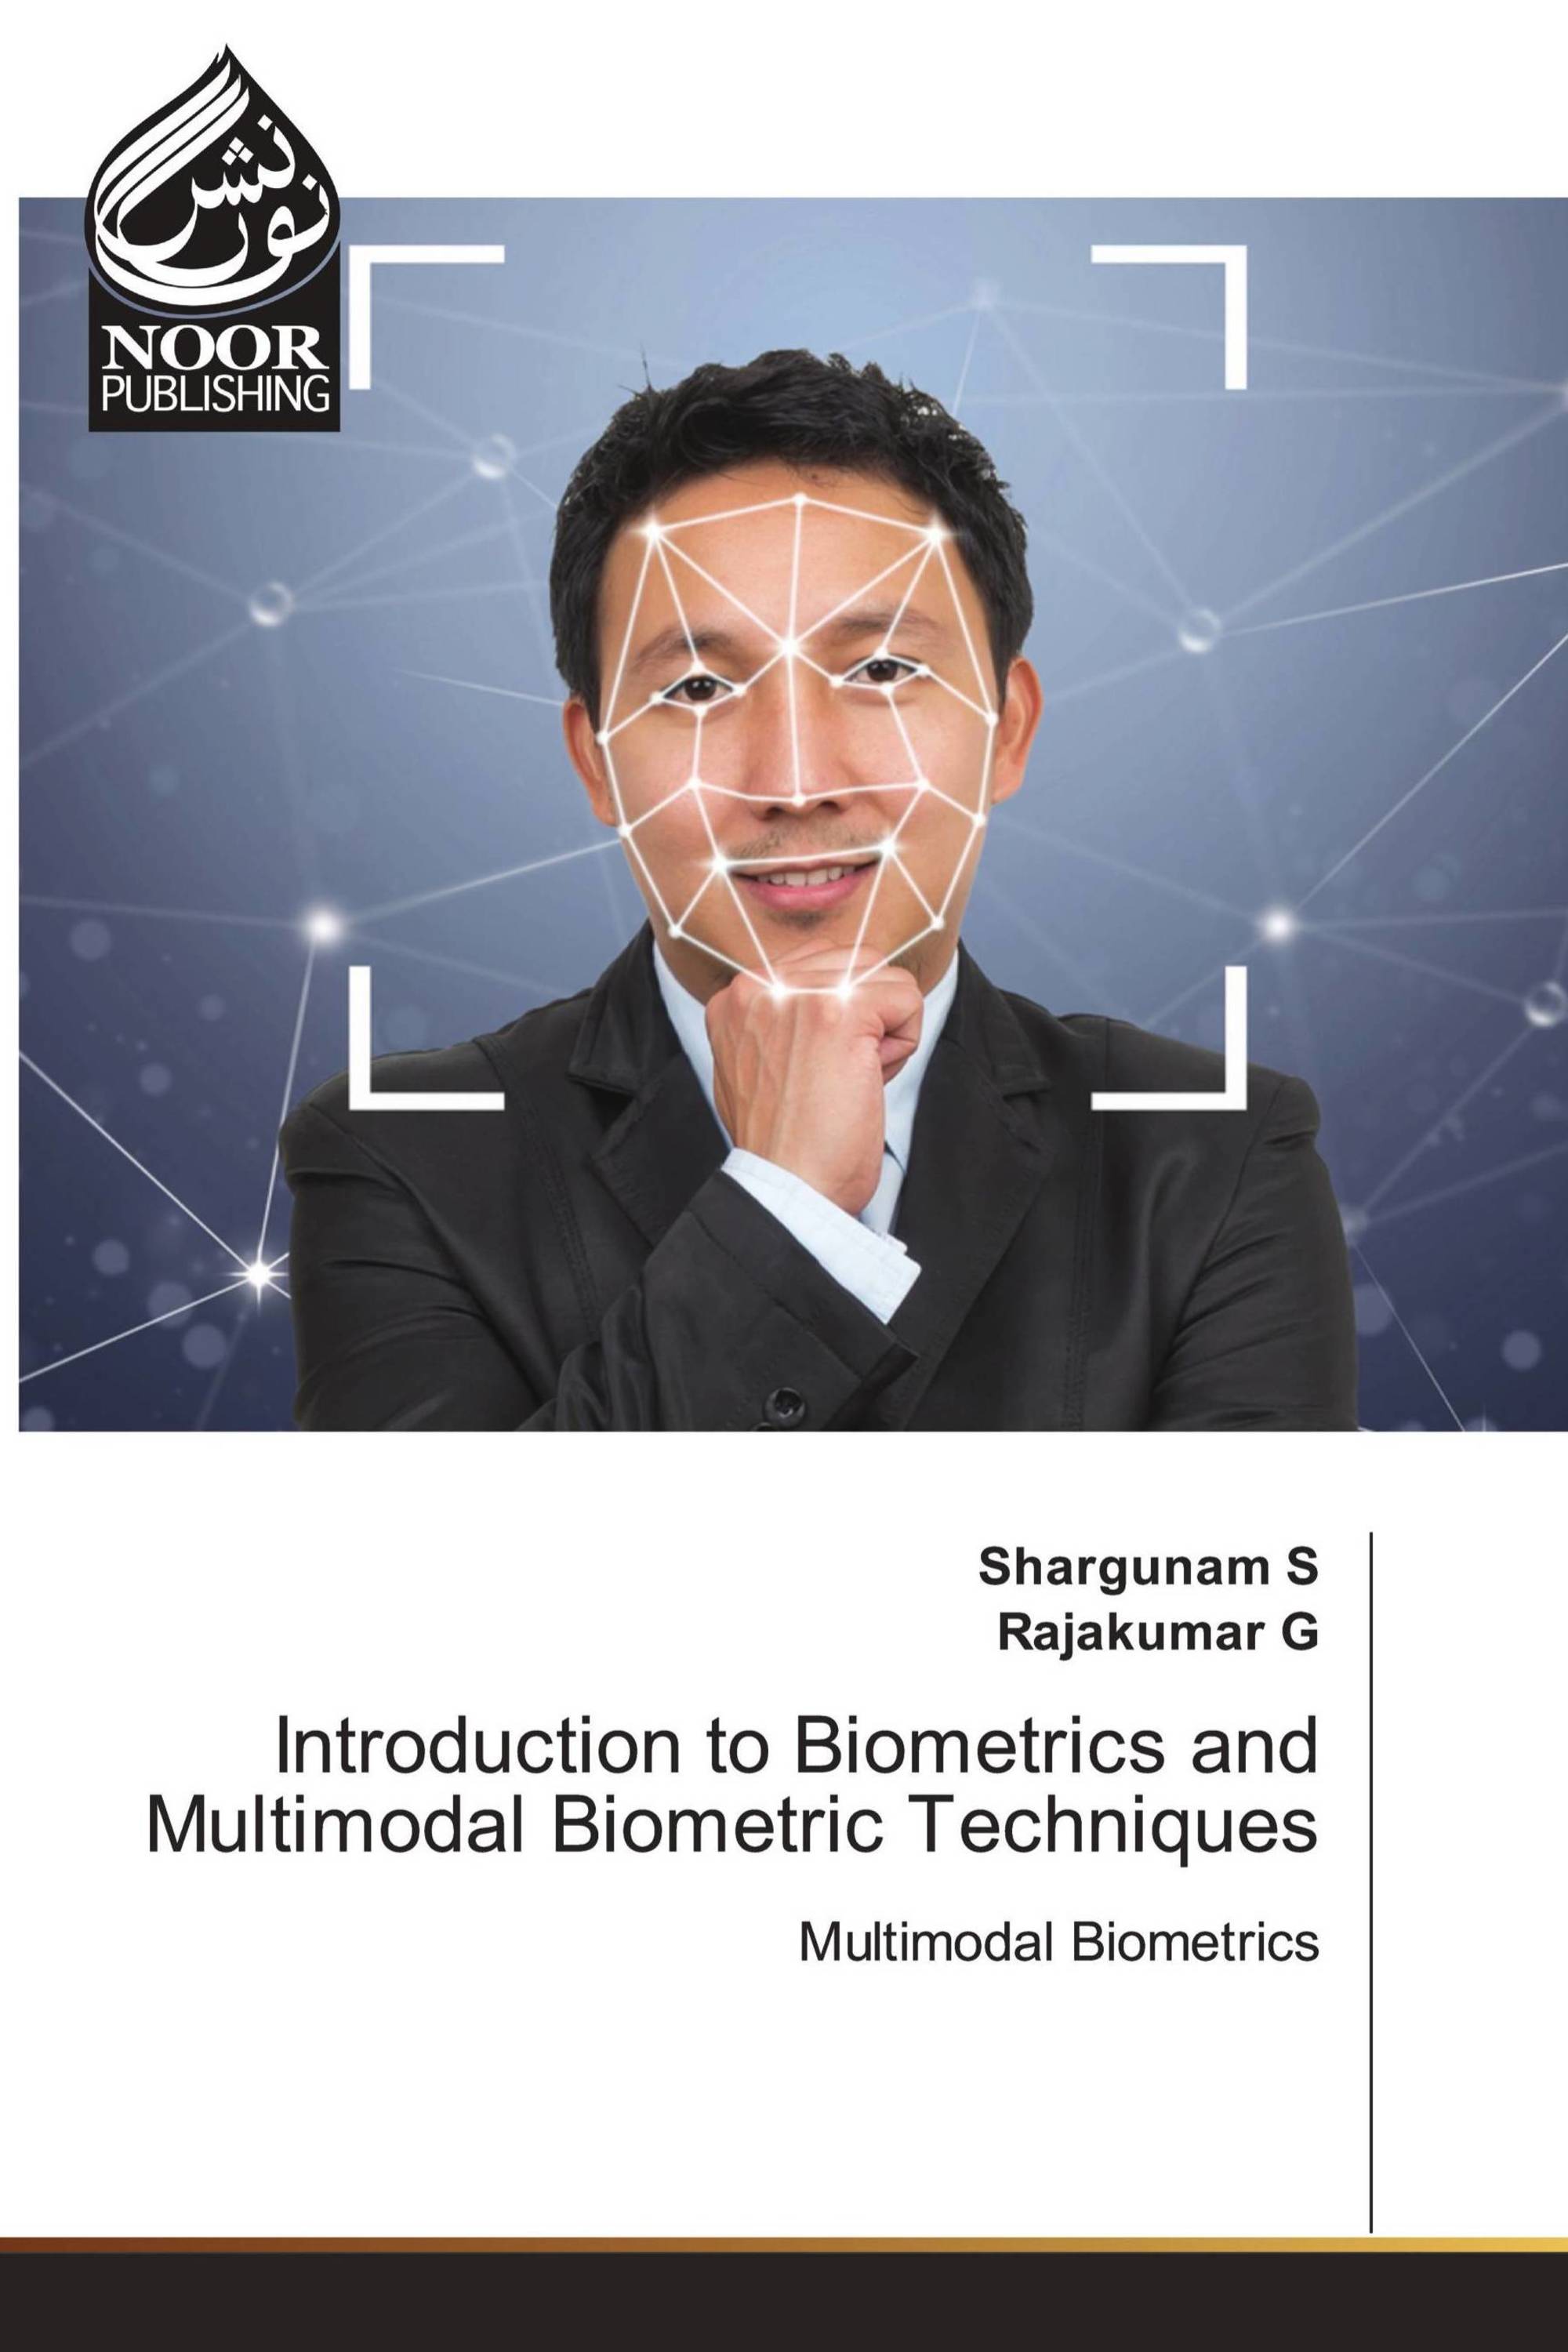 Introduction to Biometrics and Multimodal Biometric Techniques